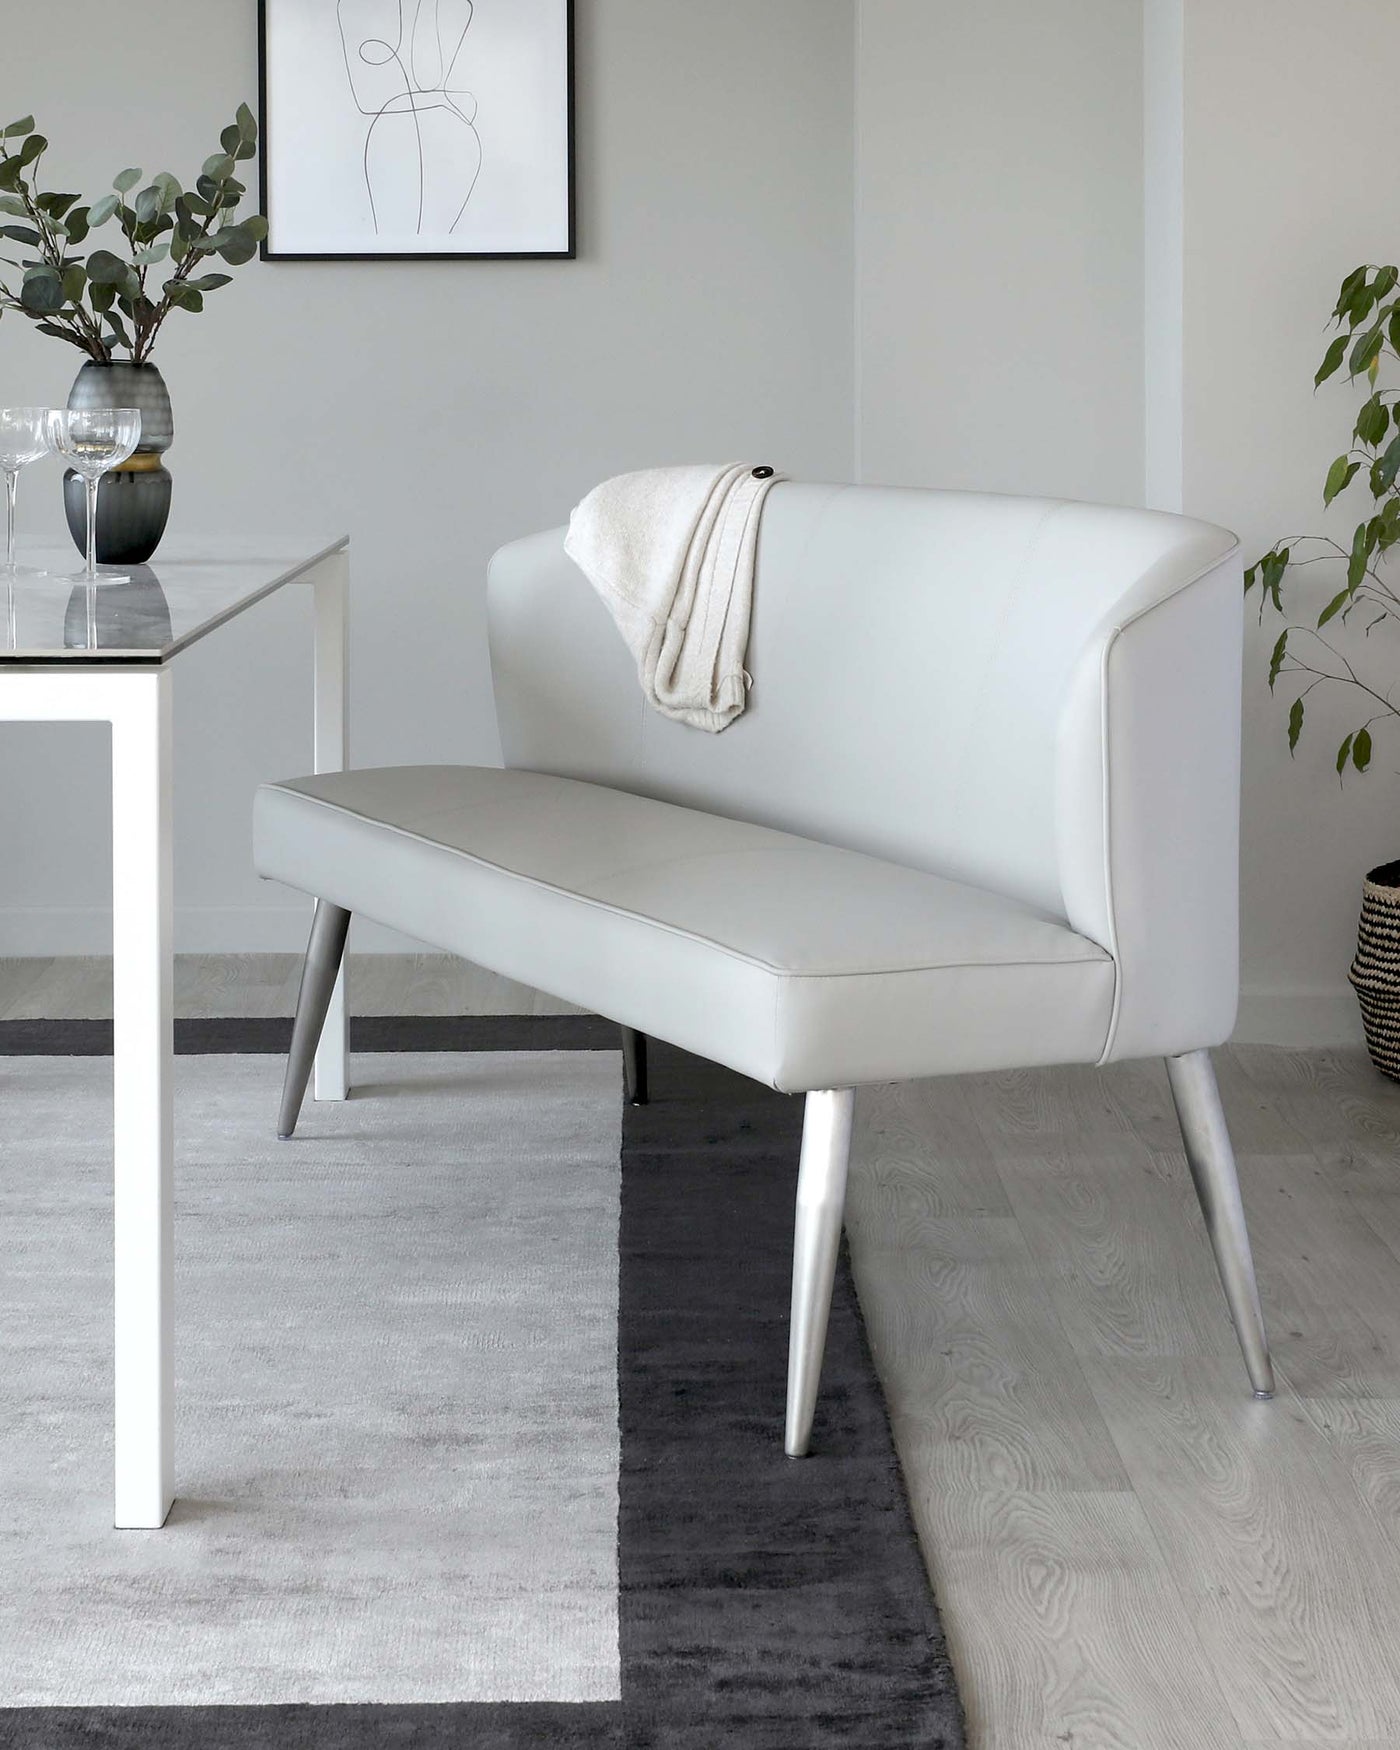 Elegant minimalist-style interior featuring a sleek white leather upholstered bench with a high backrest and angled metal legs, paired with a simple white square side table showcasing a glass vase and small plant. The setting is enhanced by a monochromatic area rug and subtle wall art, creating a modern and sophisticated space.